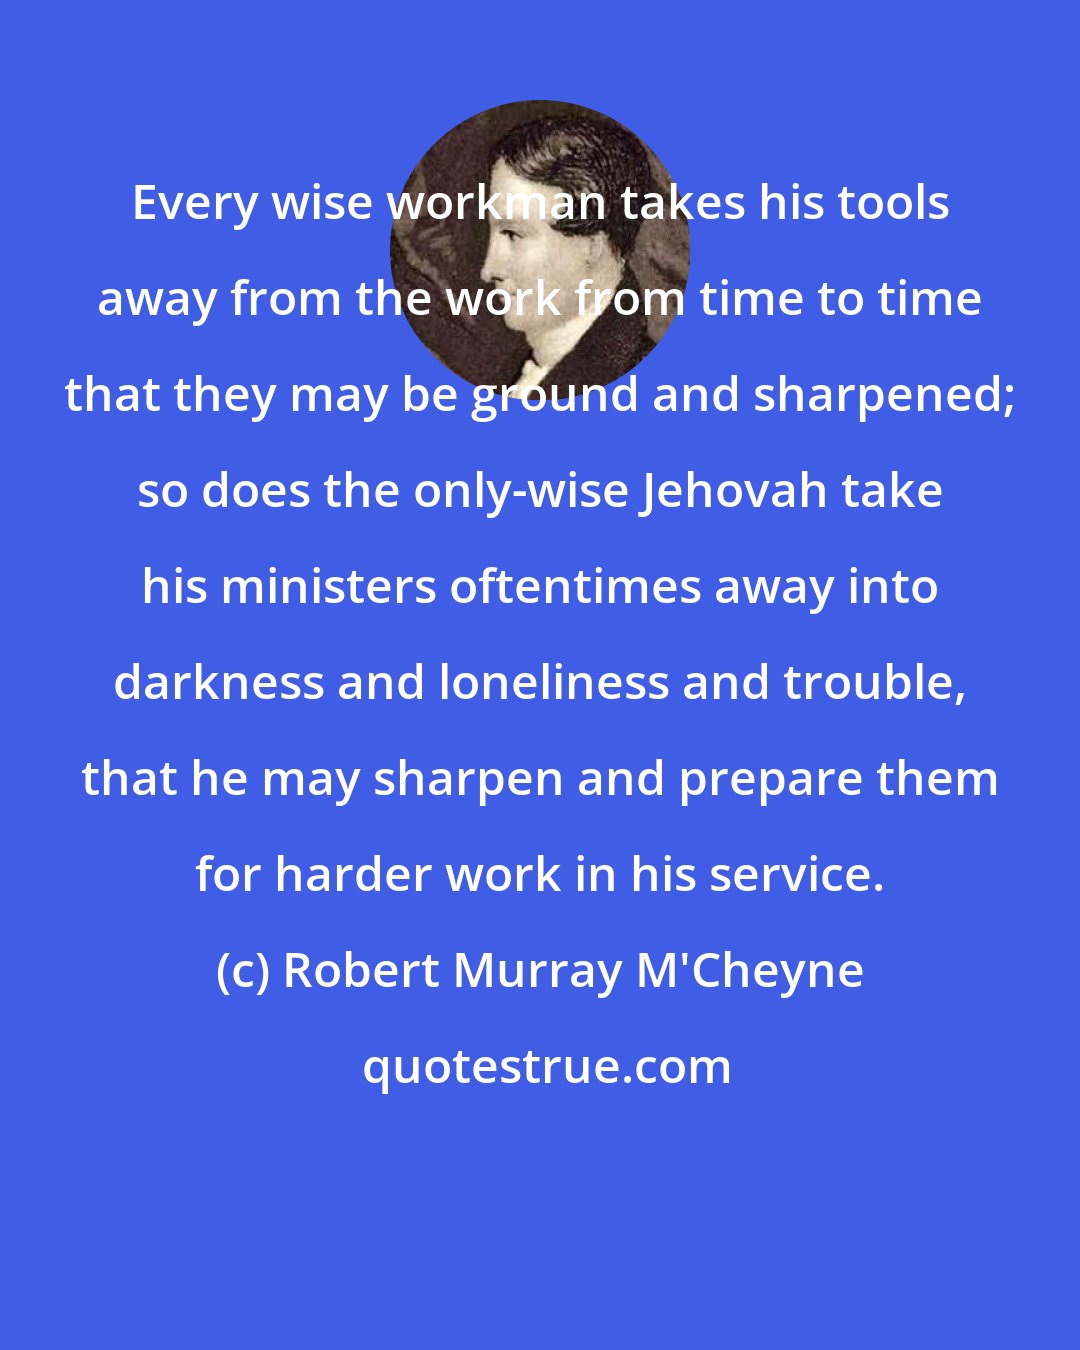 Robert Murray M'Cheyne: Every wise workman takes his tools away from the work from time to time that they may be ground and sharpened; so does the only-wise Jehovah take his ministers oftentimes away into darkness and loneliness and trouble, that he may sharpen and prepare them for harder work in his service.